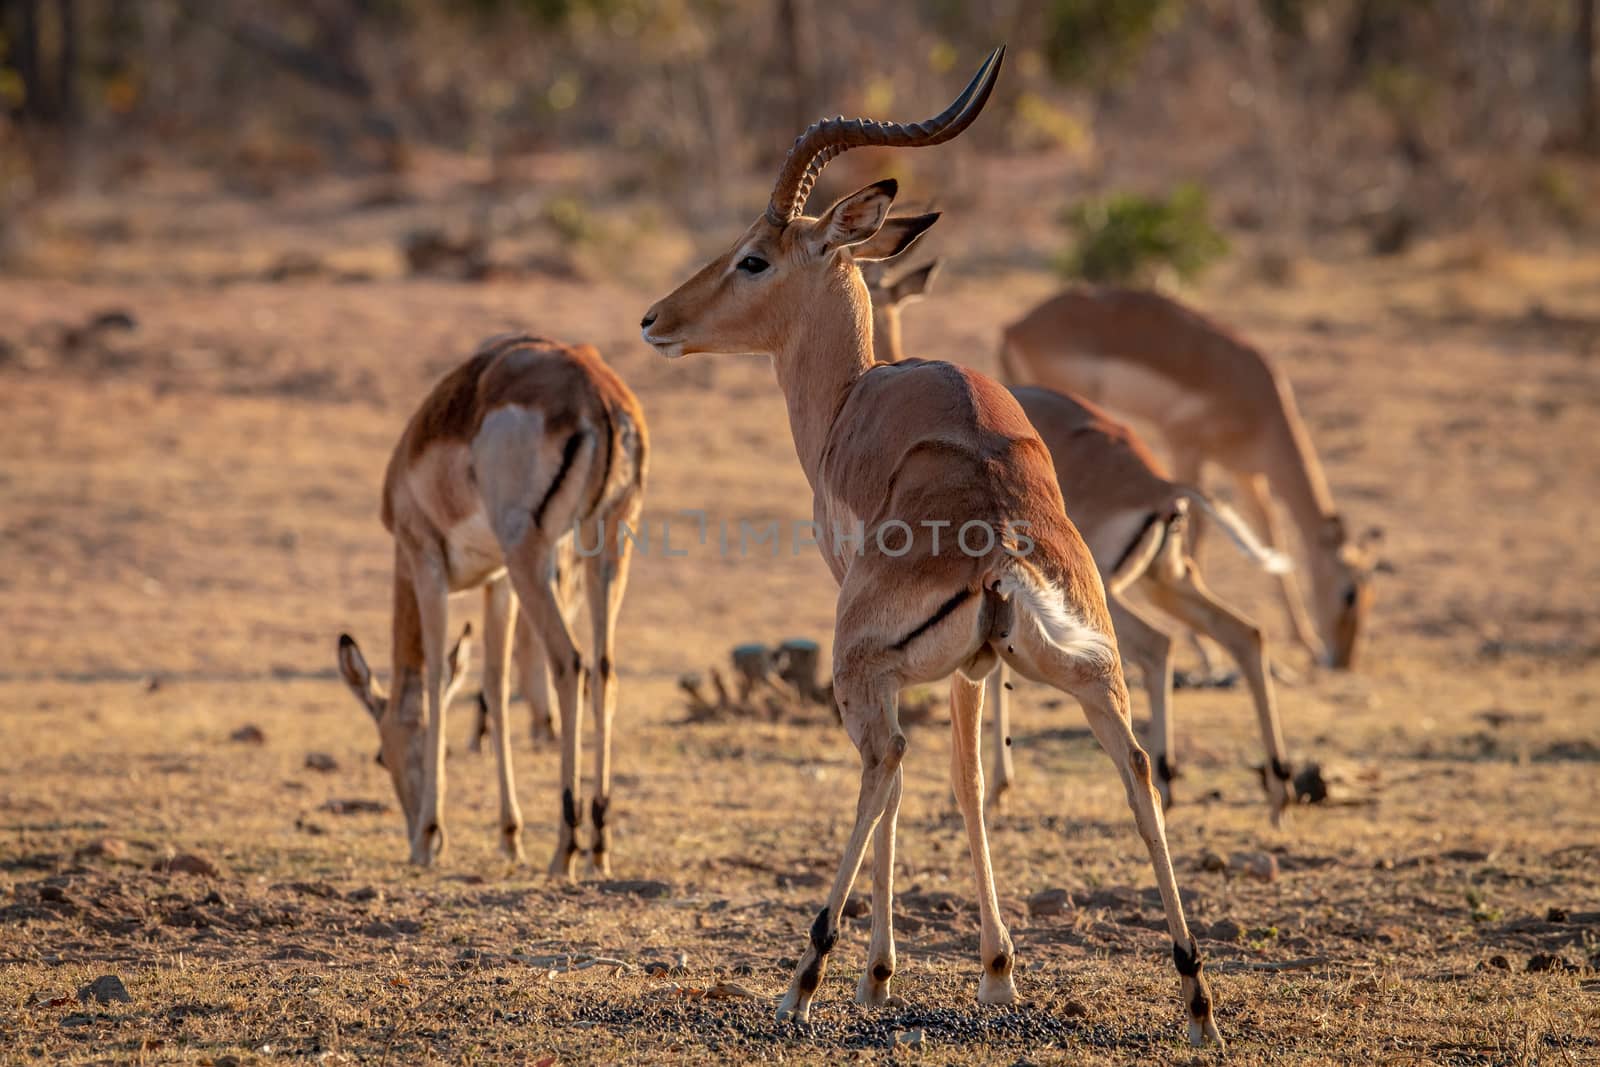 Male Impala defecating in the grass. by Simoneemanphotography